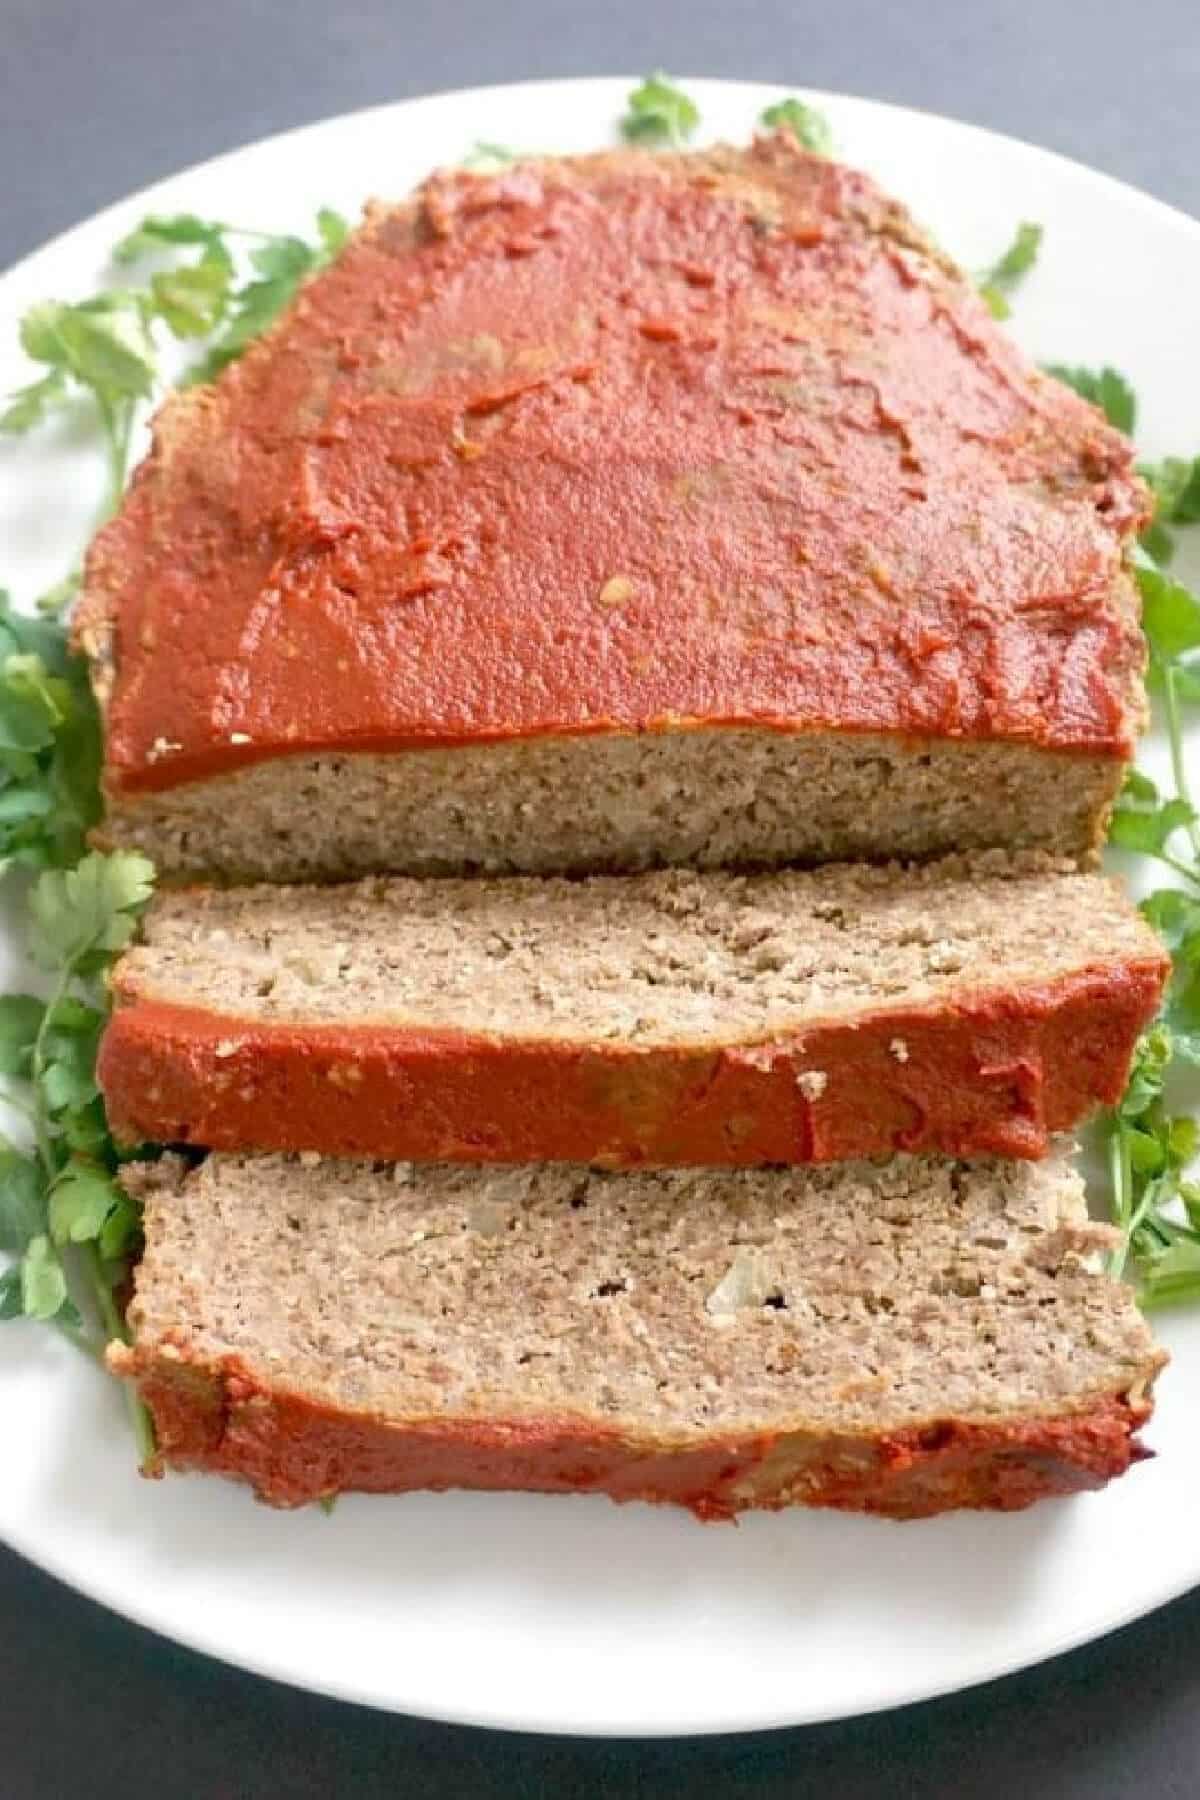 A sliced loaf meat on a white plate decorated with salad leaves.